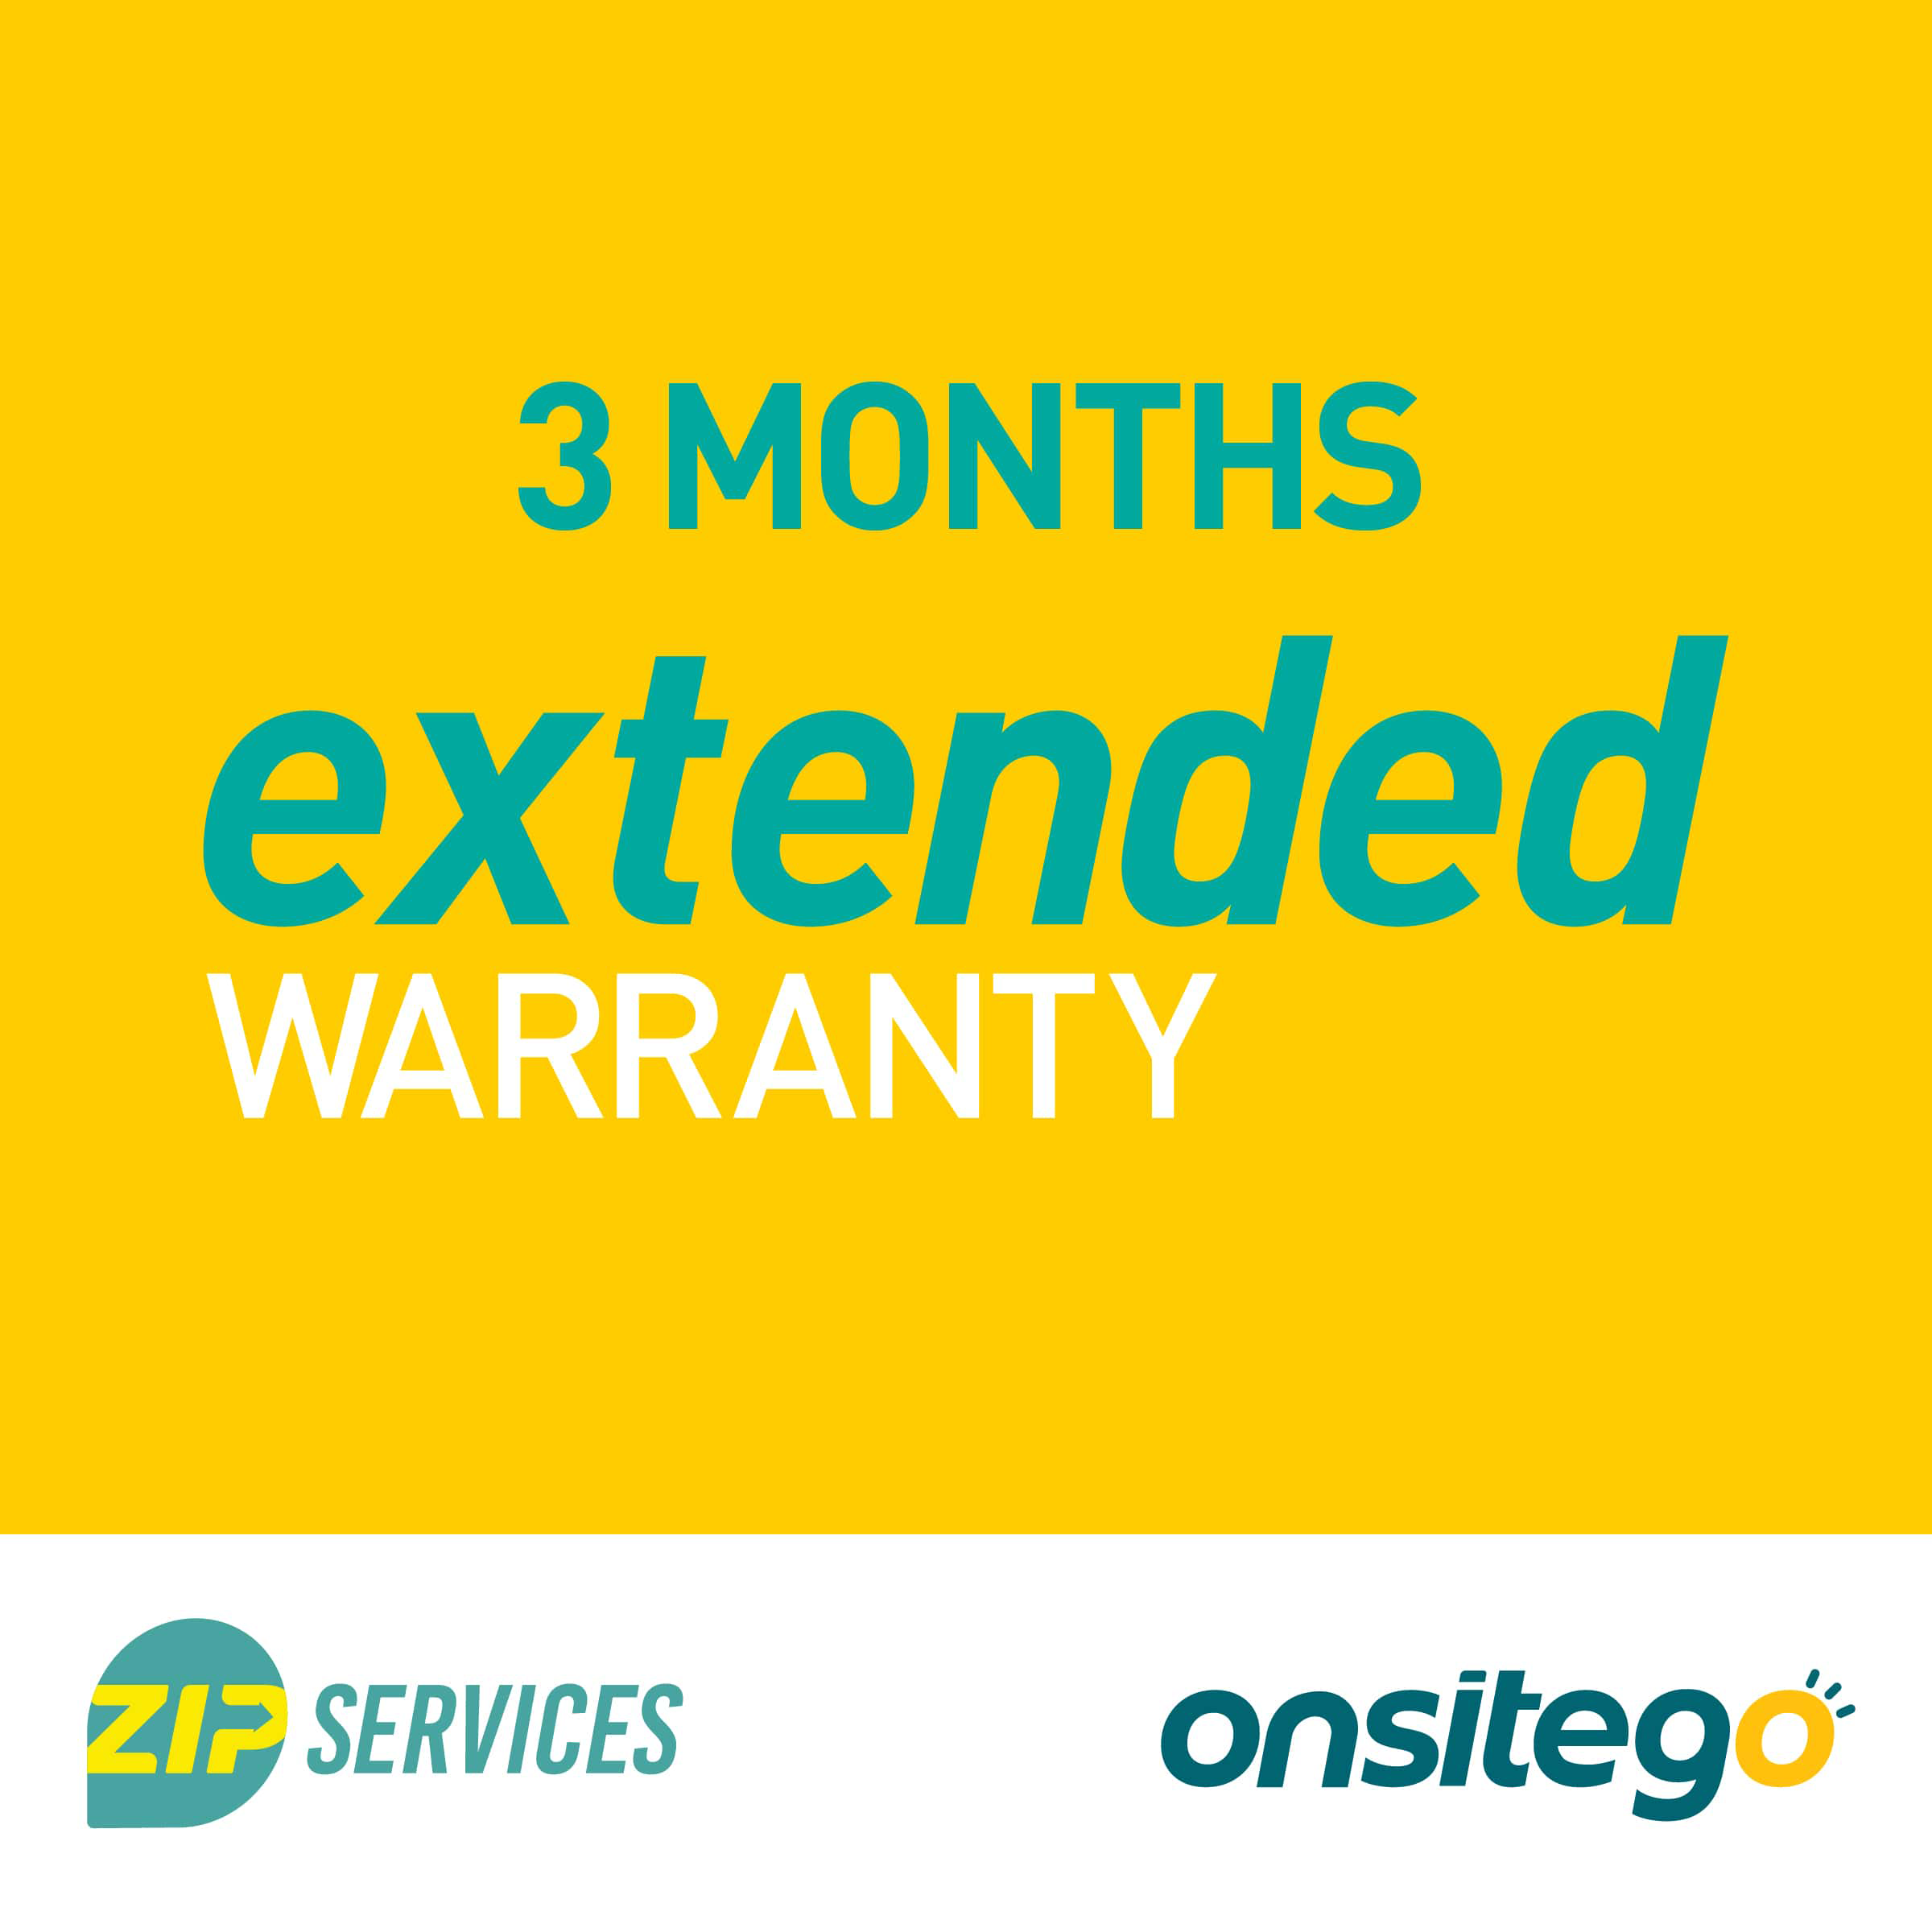 OnsiteGo 3 Months Extended Warranty for PC Accessory  Rs.7001 - Rs.8000_1